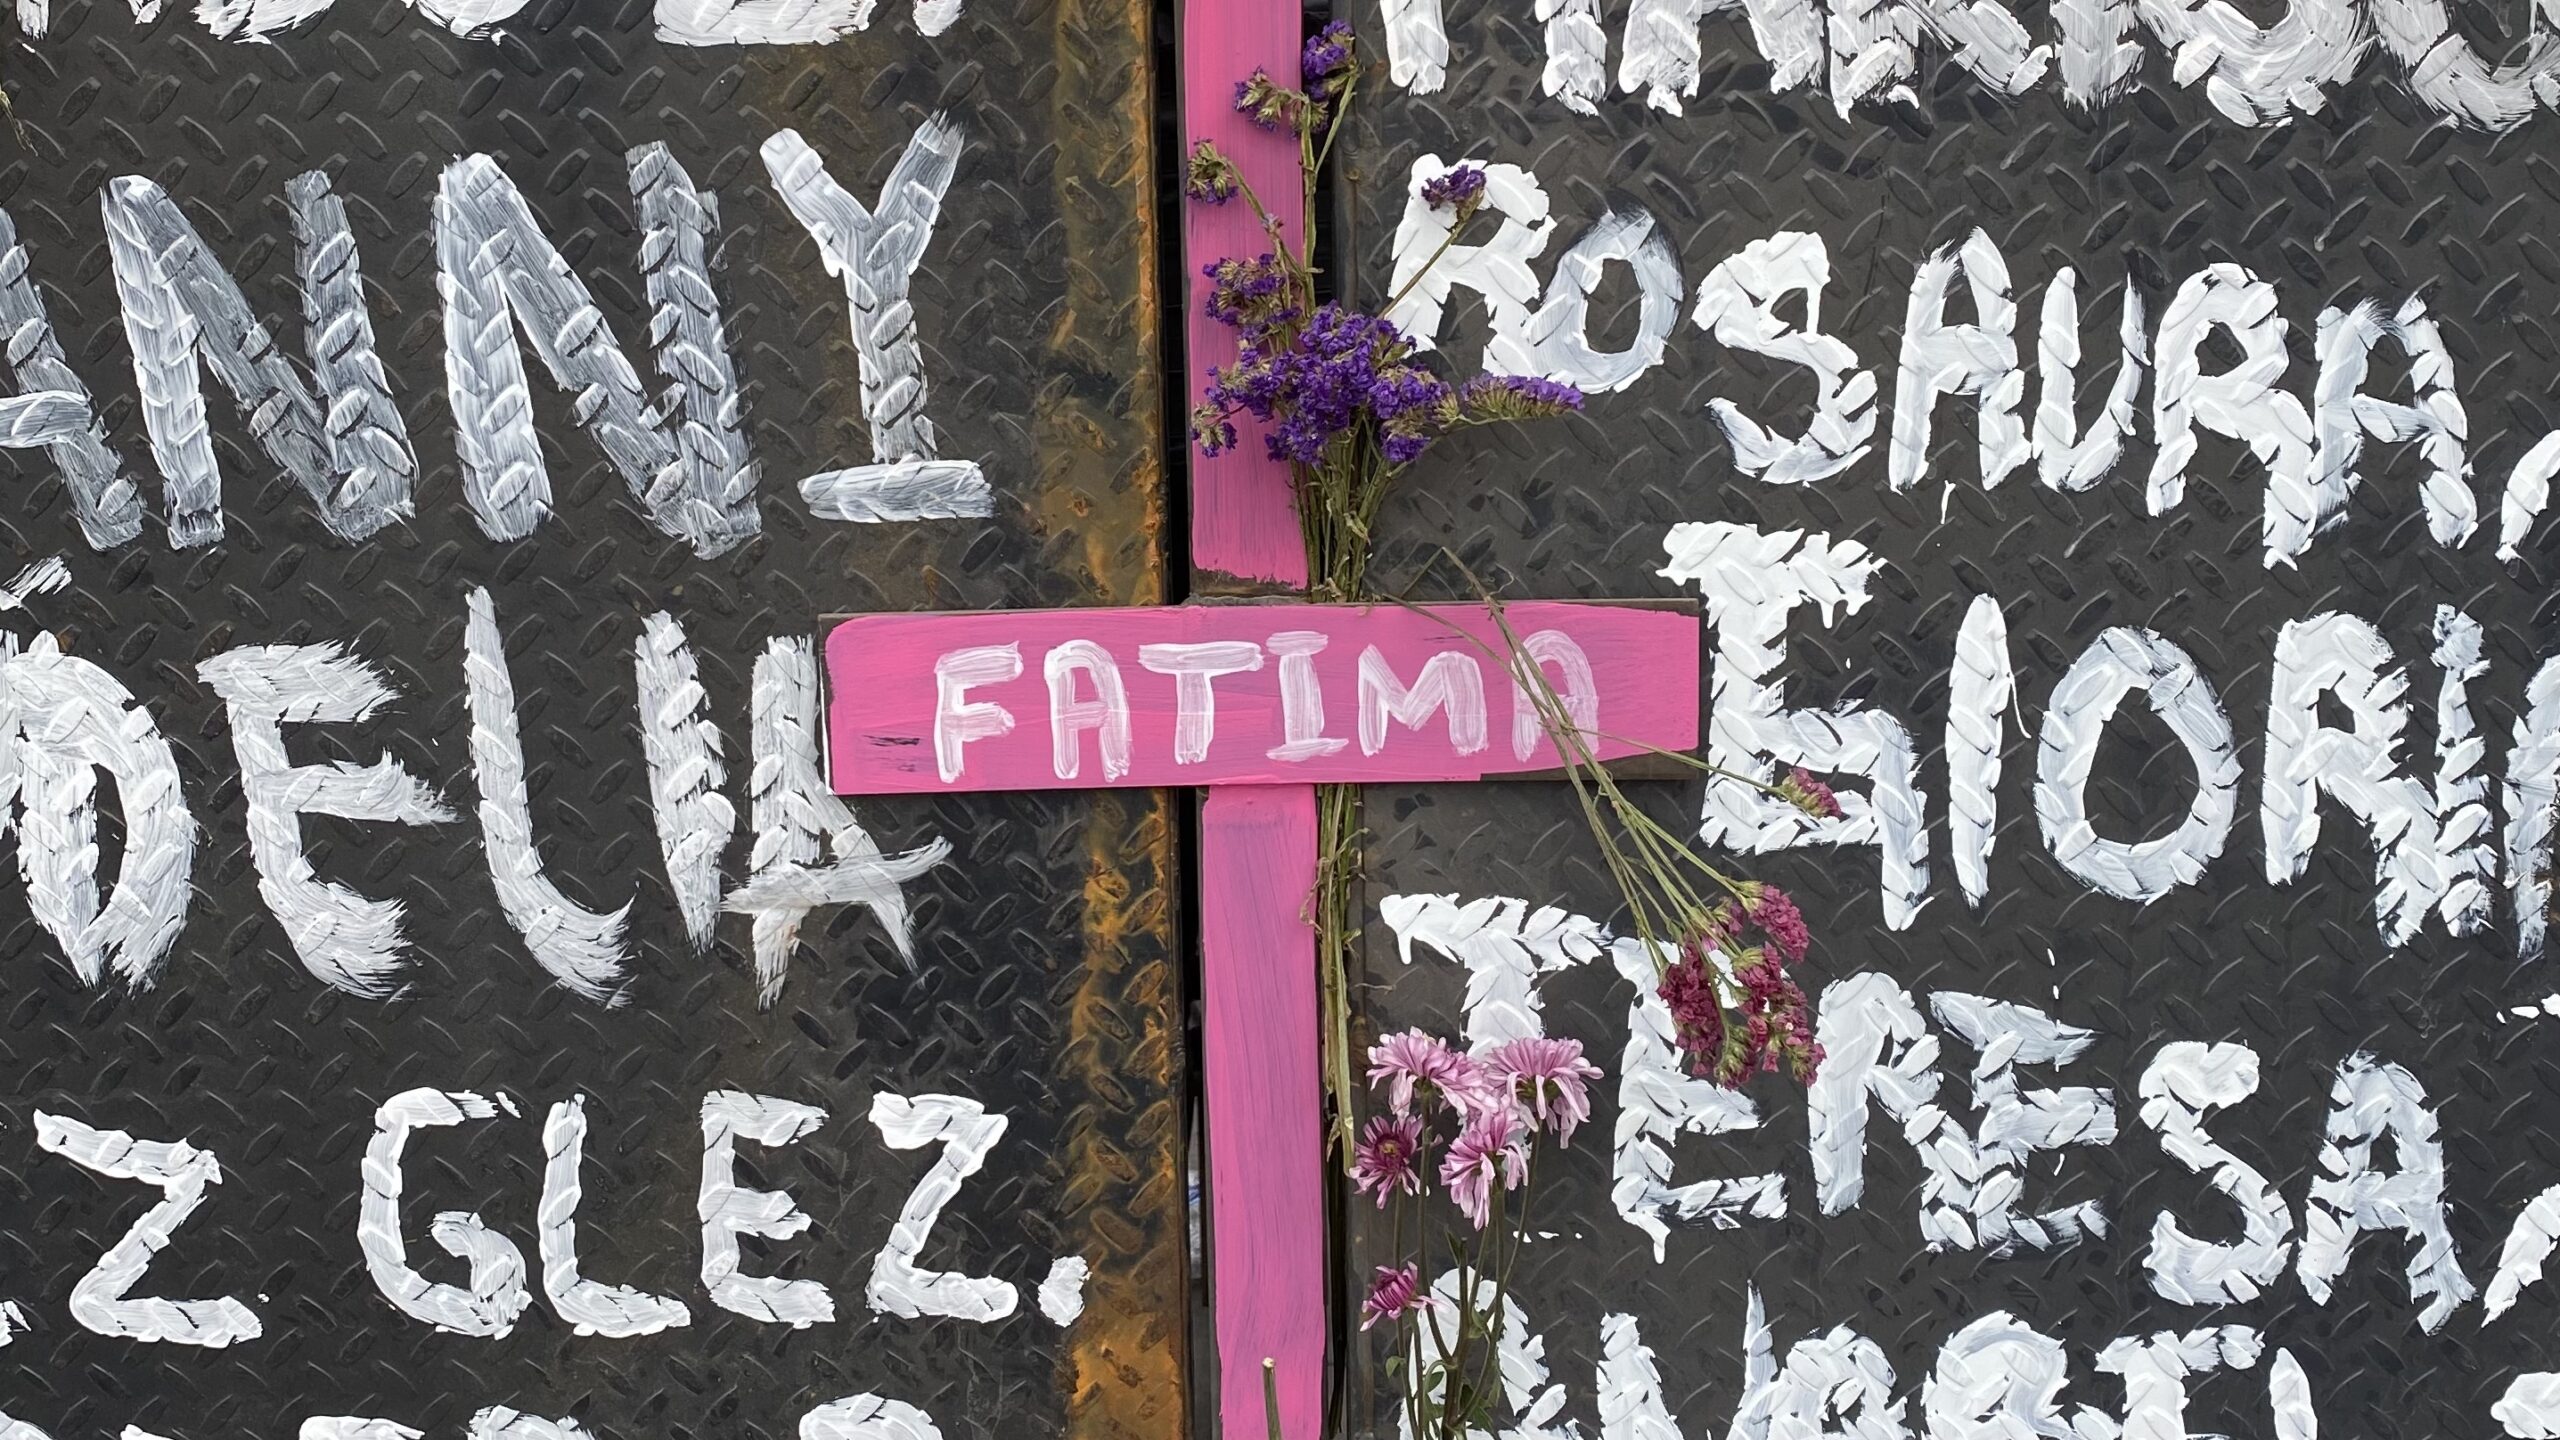 Pink cross with the name “Fatima” written with flowers hanging. The cross is hung on a black background and white names written around it.